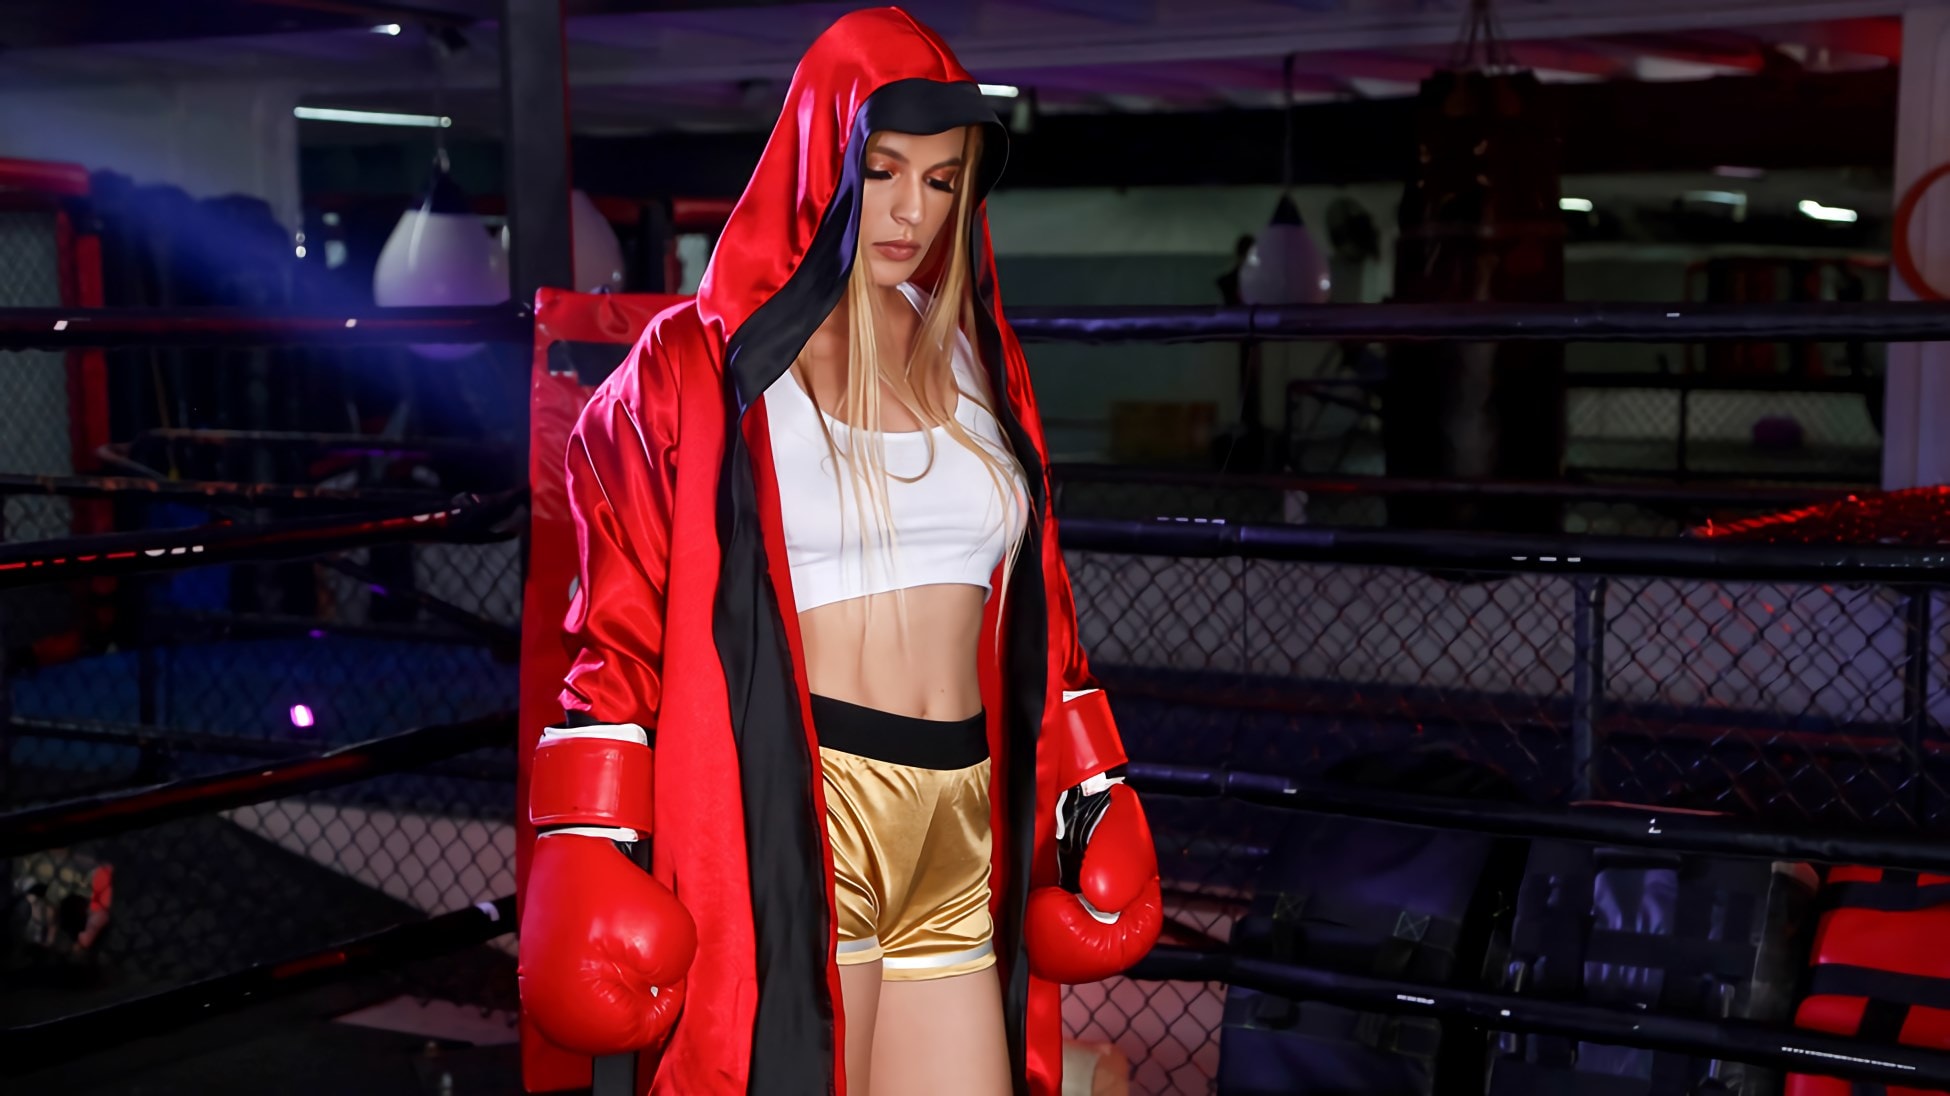 Sloan Harper in 'Boxing Babe' from 'Brazzers' (Photo 6)...